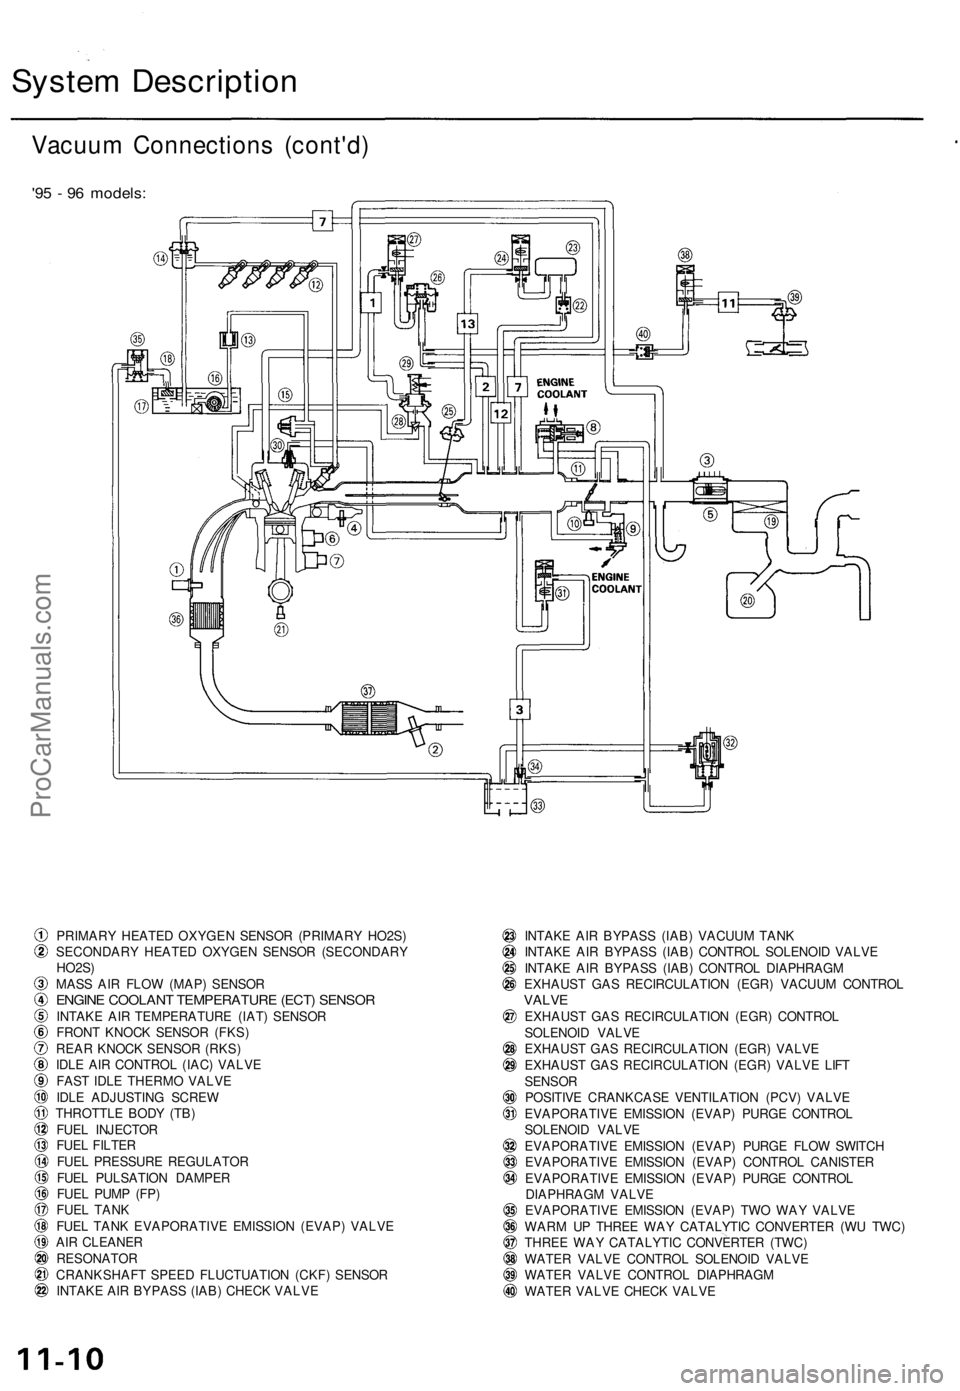 ACURA TL 1995  Service Service Manual 
System Description

Vacuum Connections (cont'd)

'95 - 96 models:

PRIMARY HEATED OXYGEN SENSOR (PRIMARY HO2S)

SECONDARY HEATED OXYGEN SENSOR (SECONDARY

HO2S)

MASS AIR FLOW (MAP) SENSOR

E